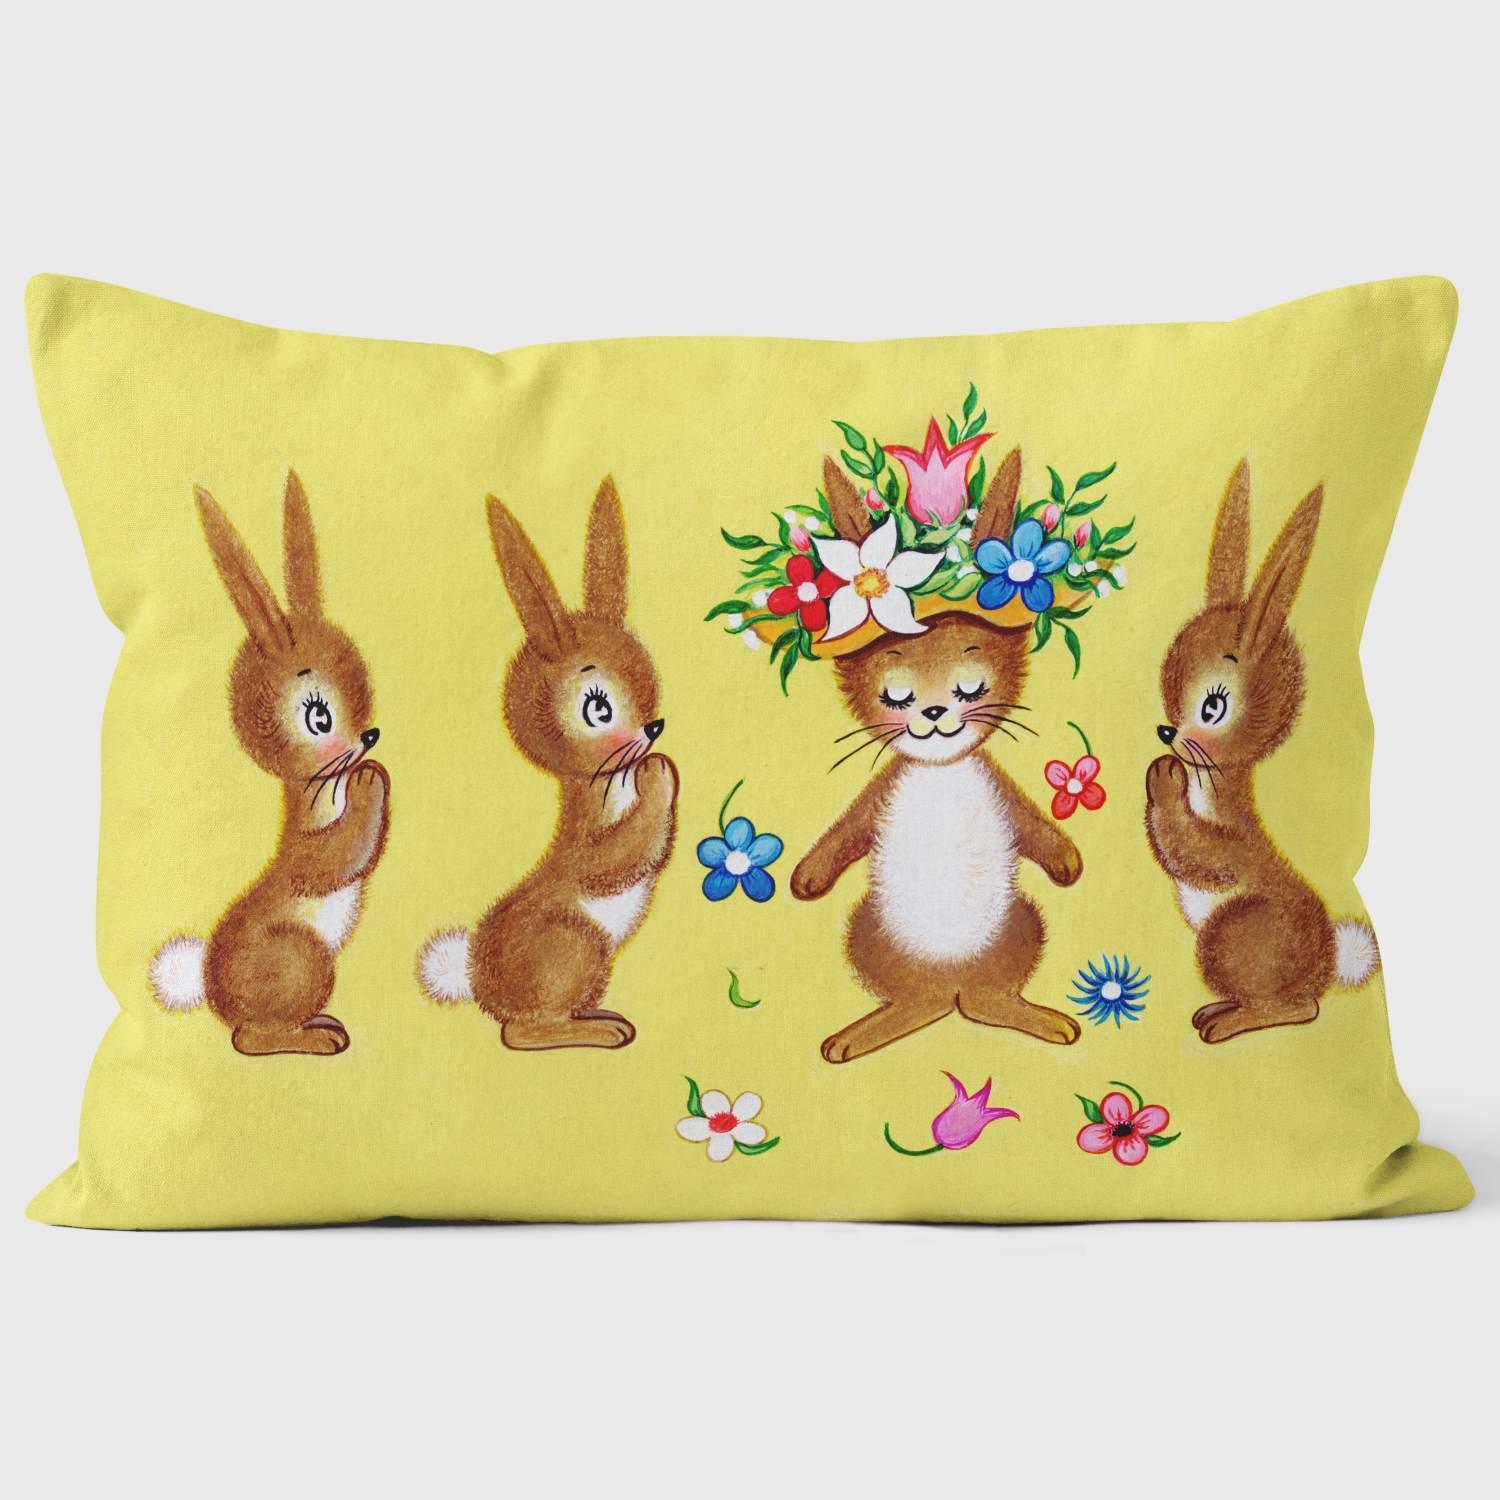 Four Rabbits and Easter Bonnett - Special Occasions Cushion - Handmade Cushions UK - WeLoveCushions